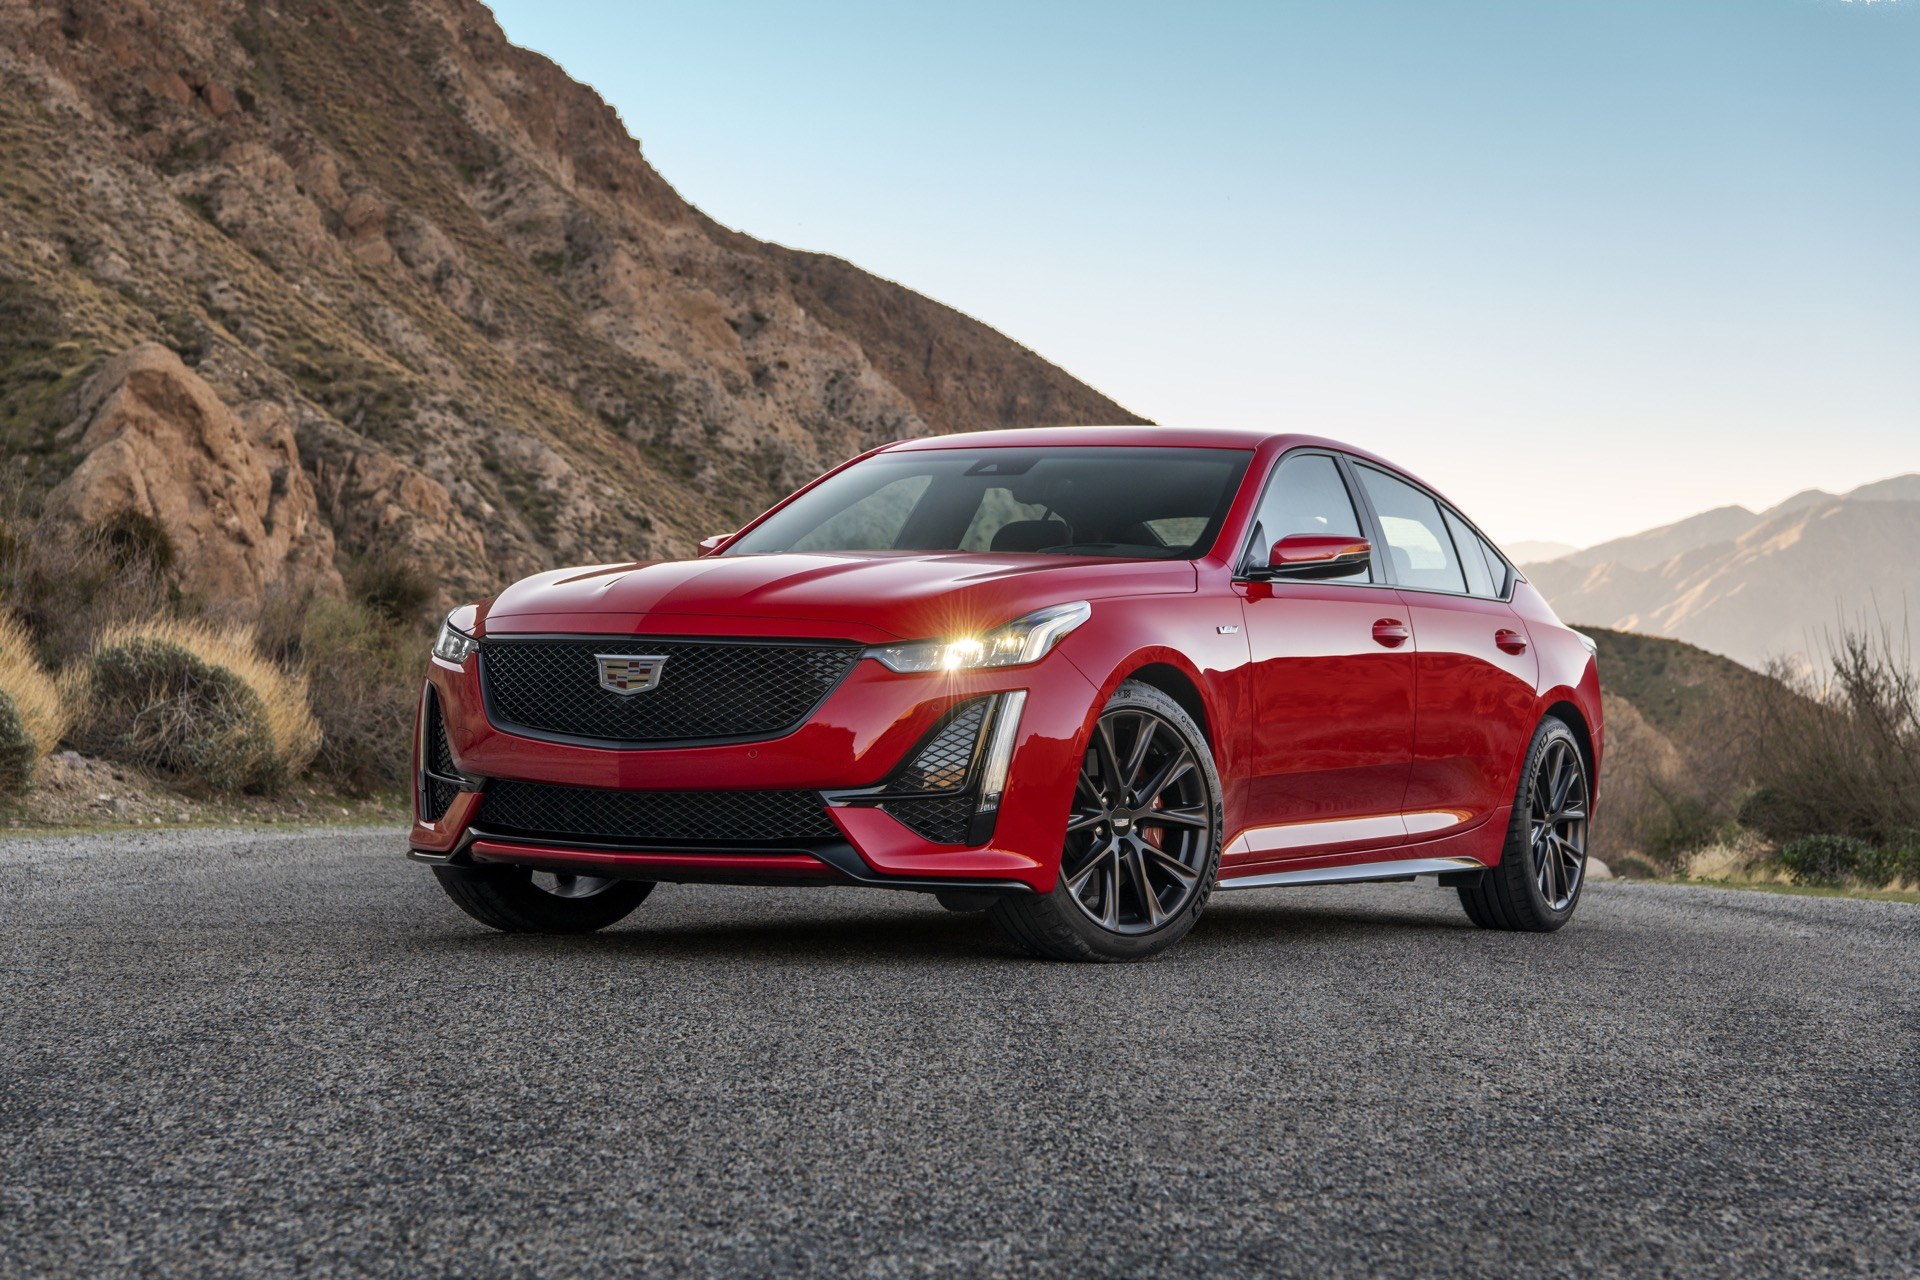 2020 Cadillac CT5-V Pricing Revealed, Starts at $49,685 » AutoGuide.com News